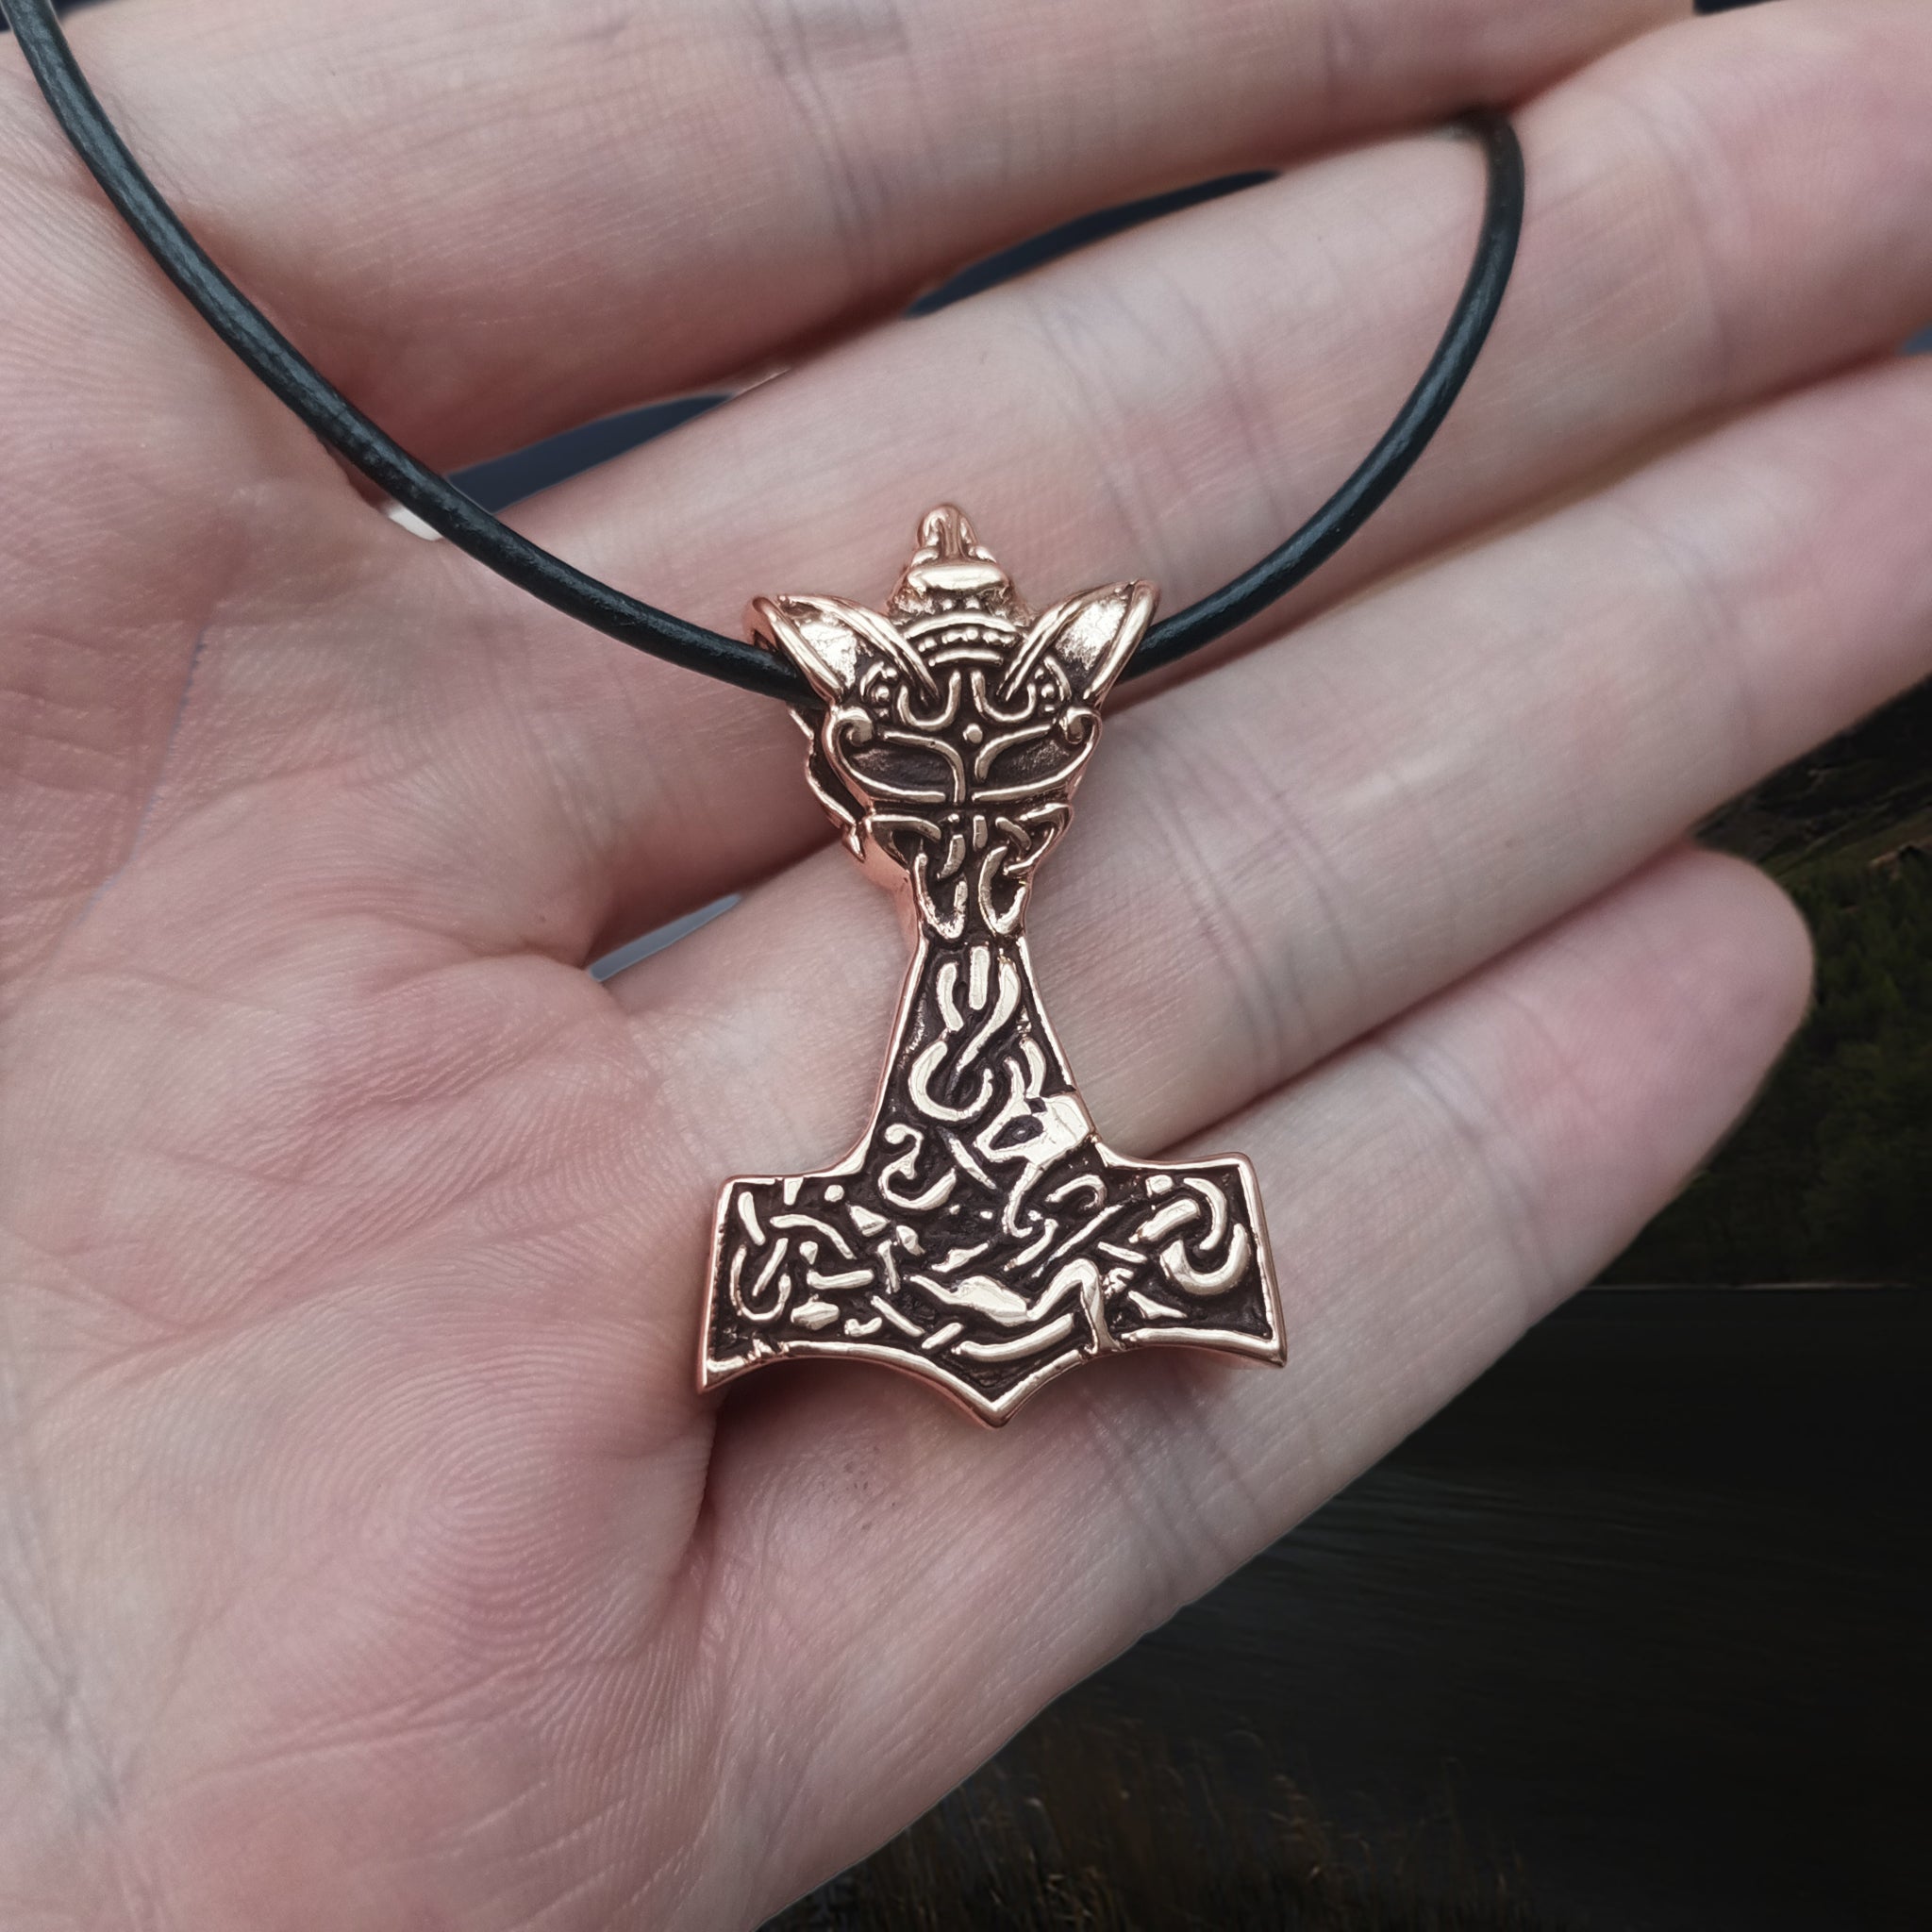 Bronze Wolf Thors Hammer Pendant on Hand on Leather Thong